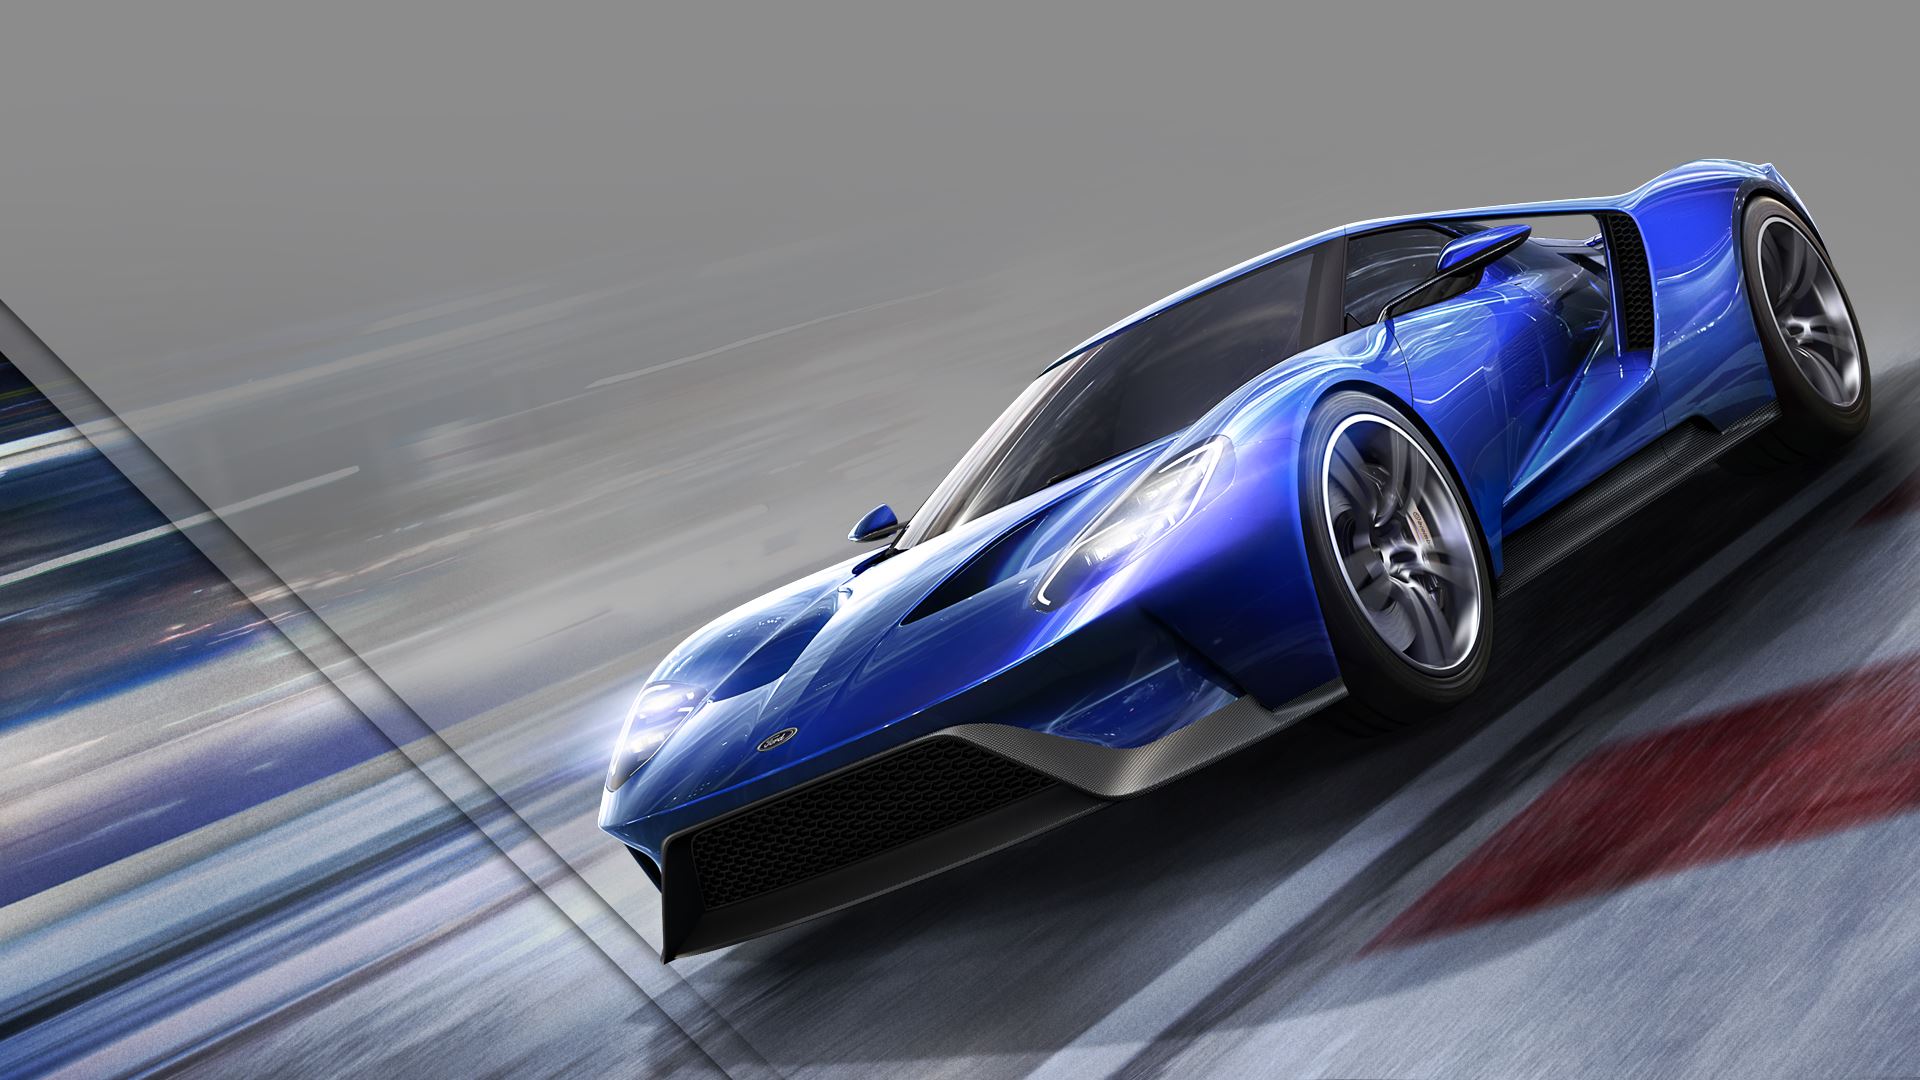 Free download wallpaper Forza Motorsport 6, Video Game, Forza on your PC desktop